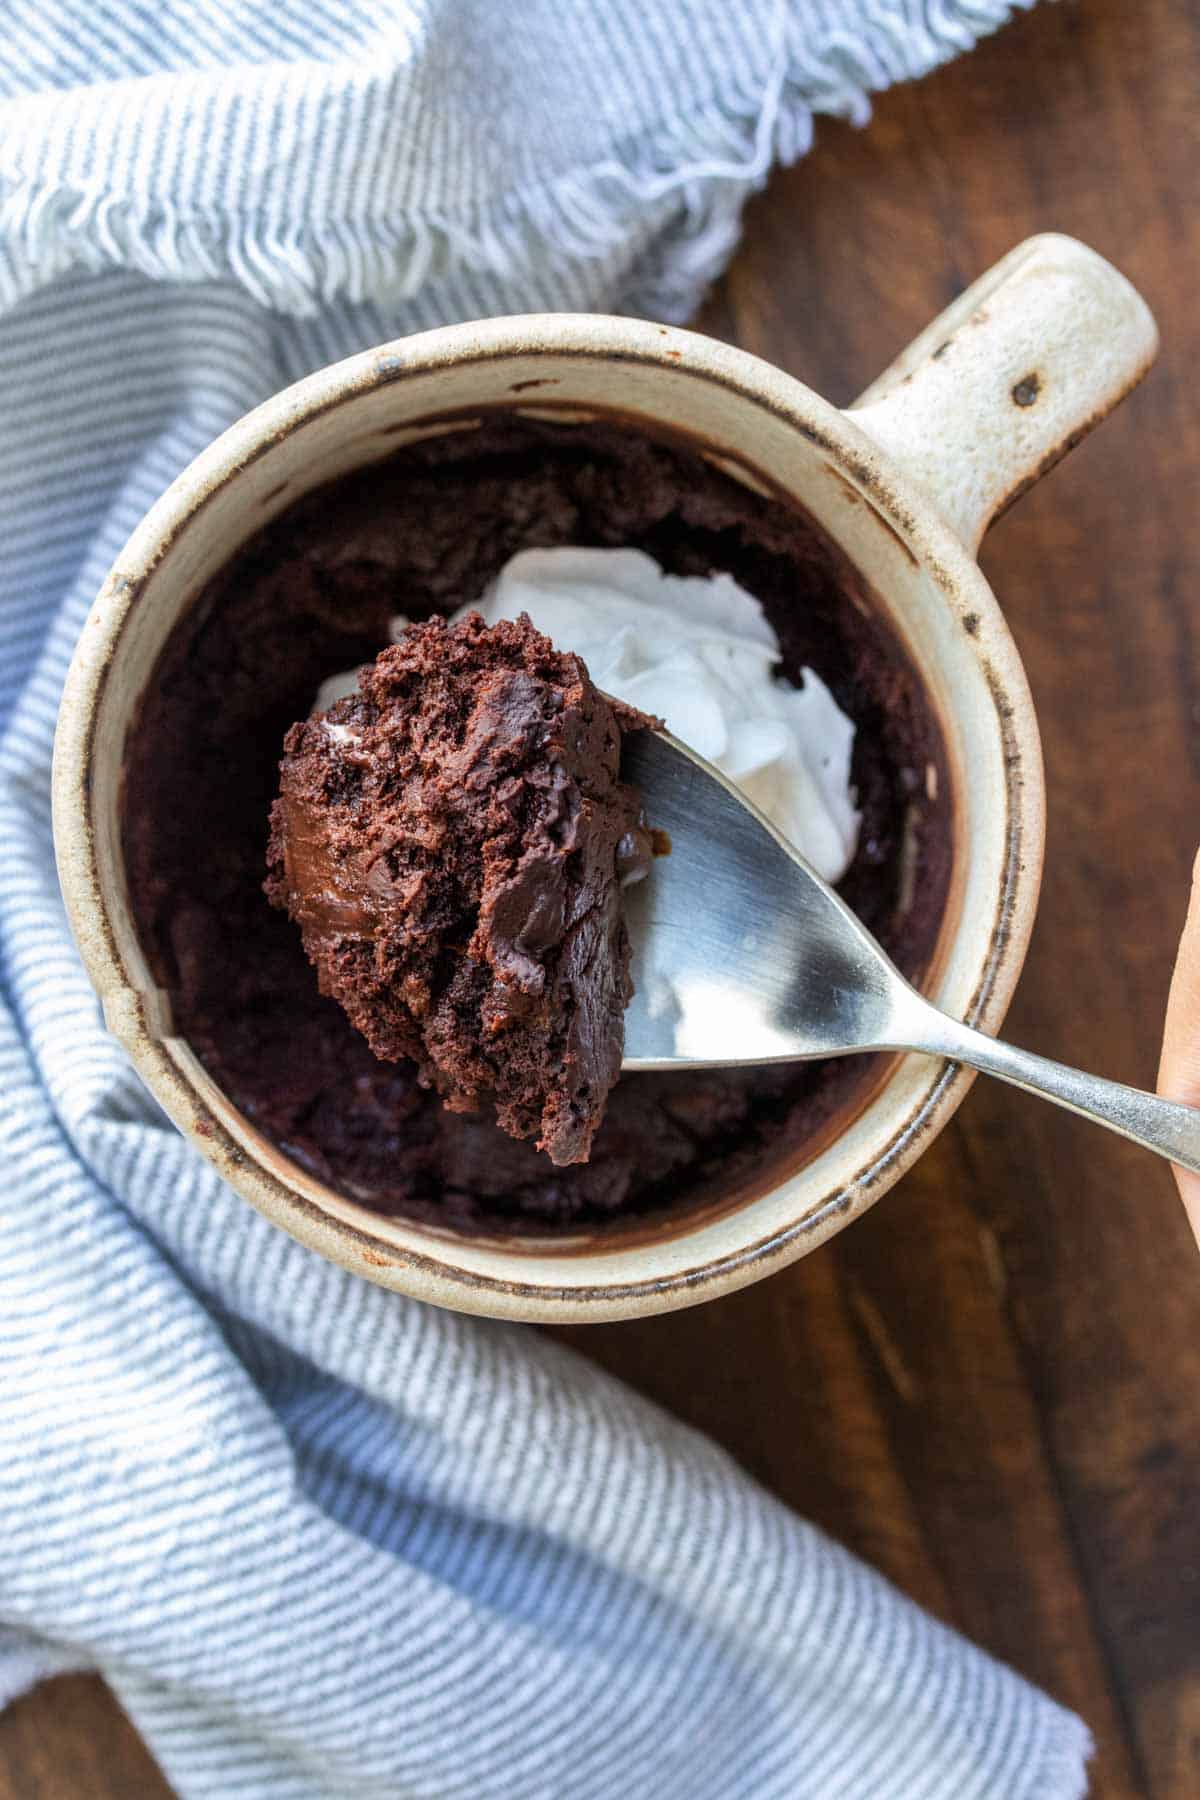 Spoon getting a bite of chocolate cake from a cream mug